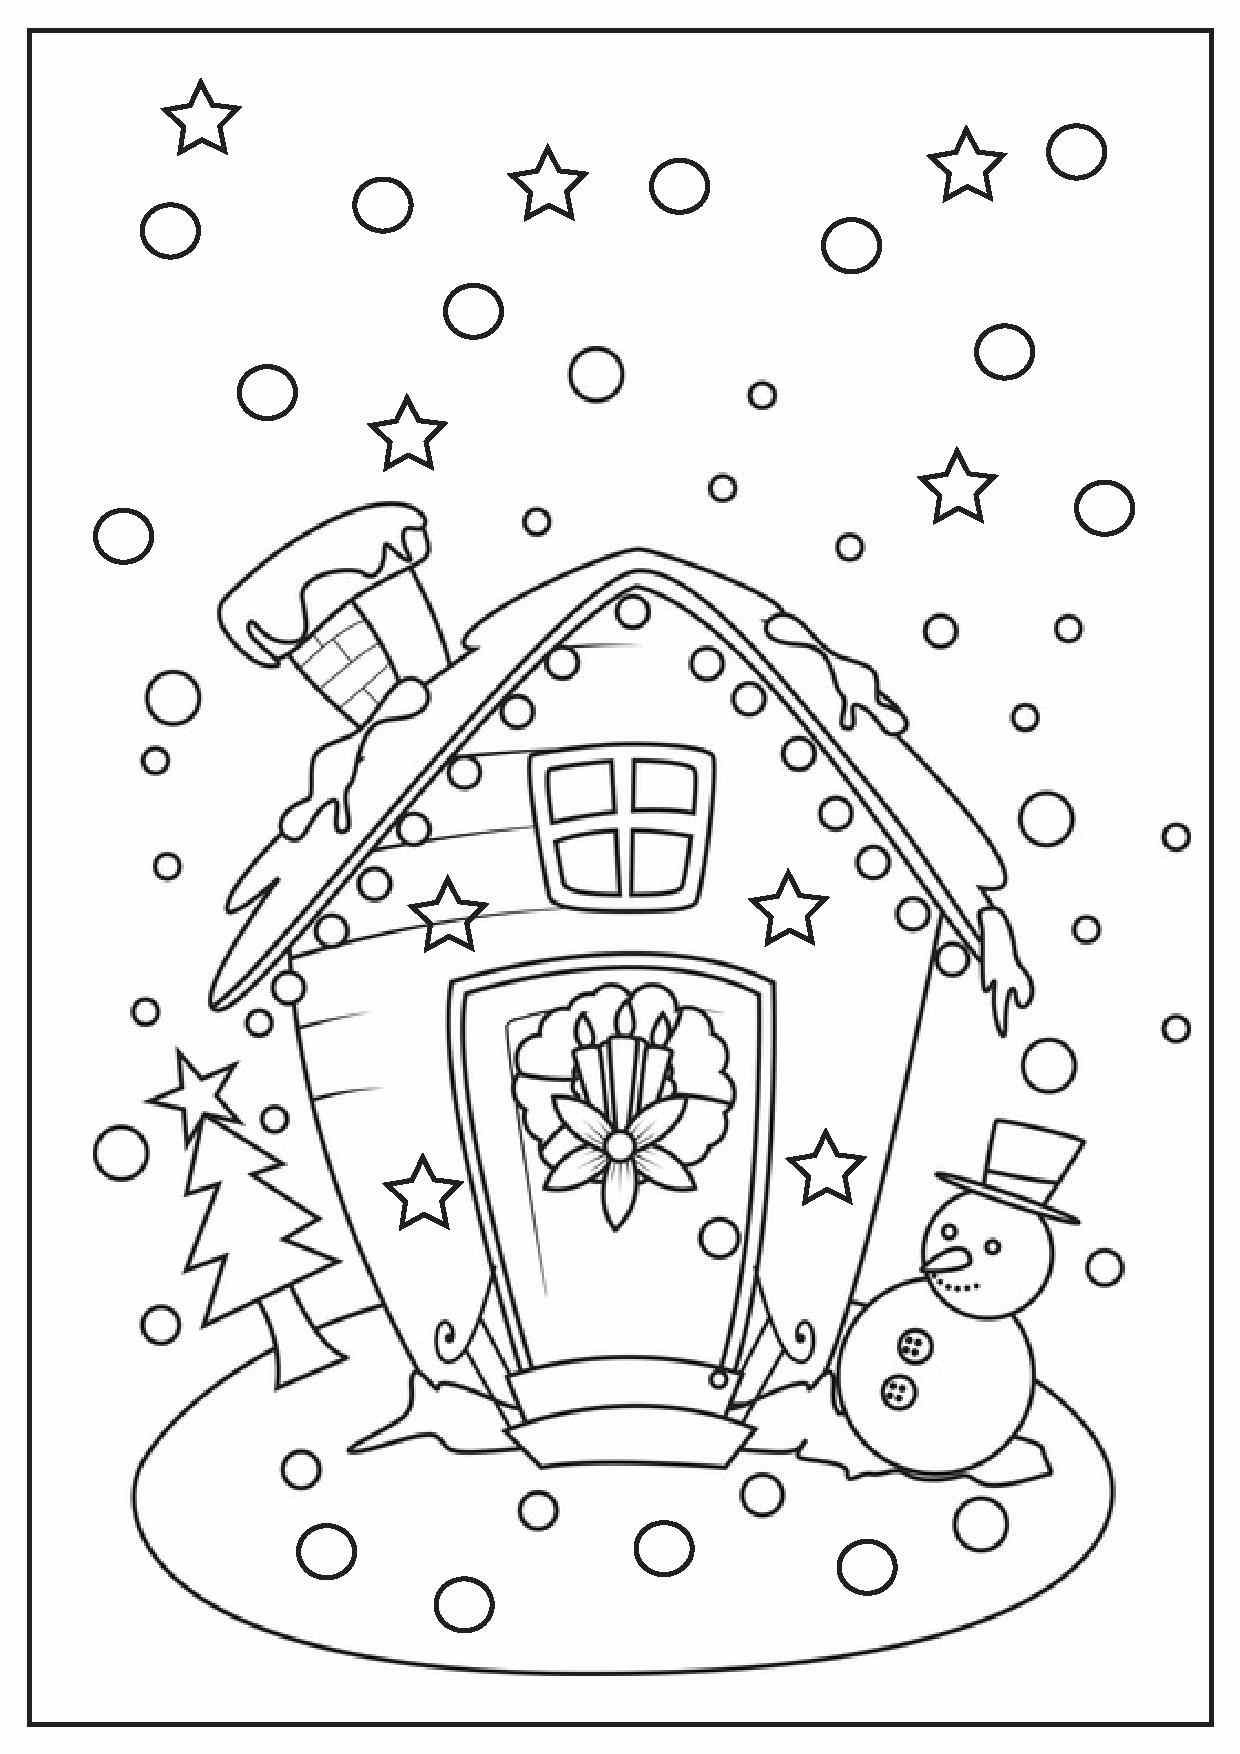 Gingerbread House Coloring Pages To Print Free - Coloring